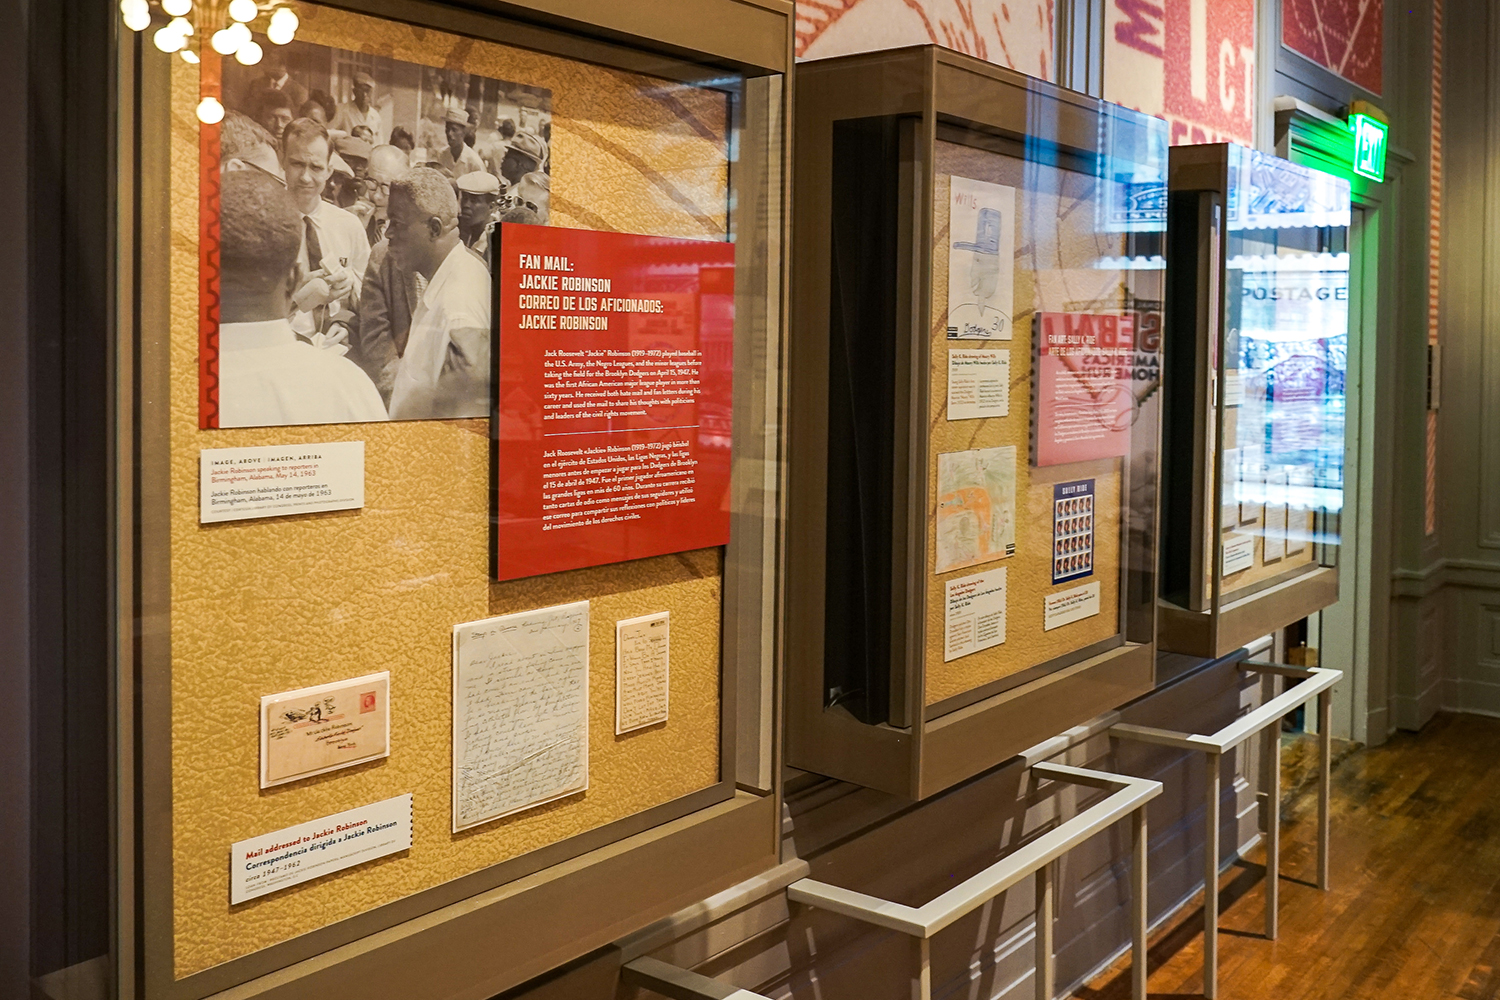 Three museum display cases with objects related to fan mail and baseball players.